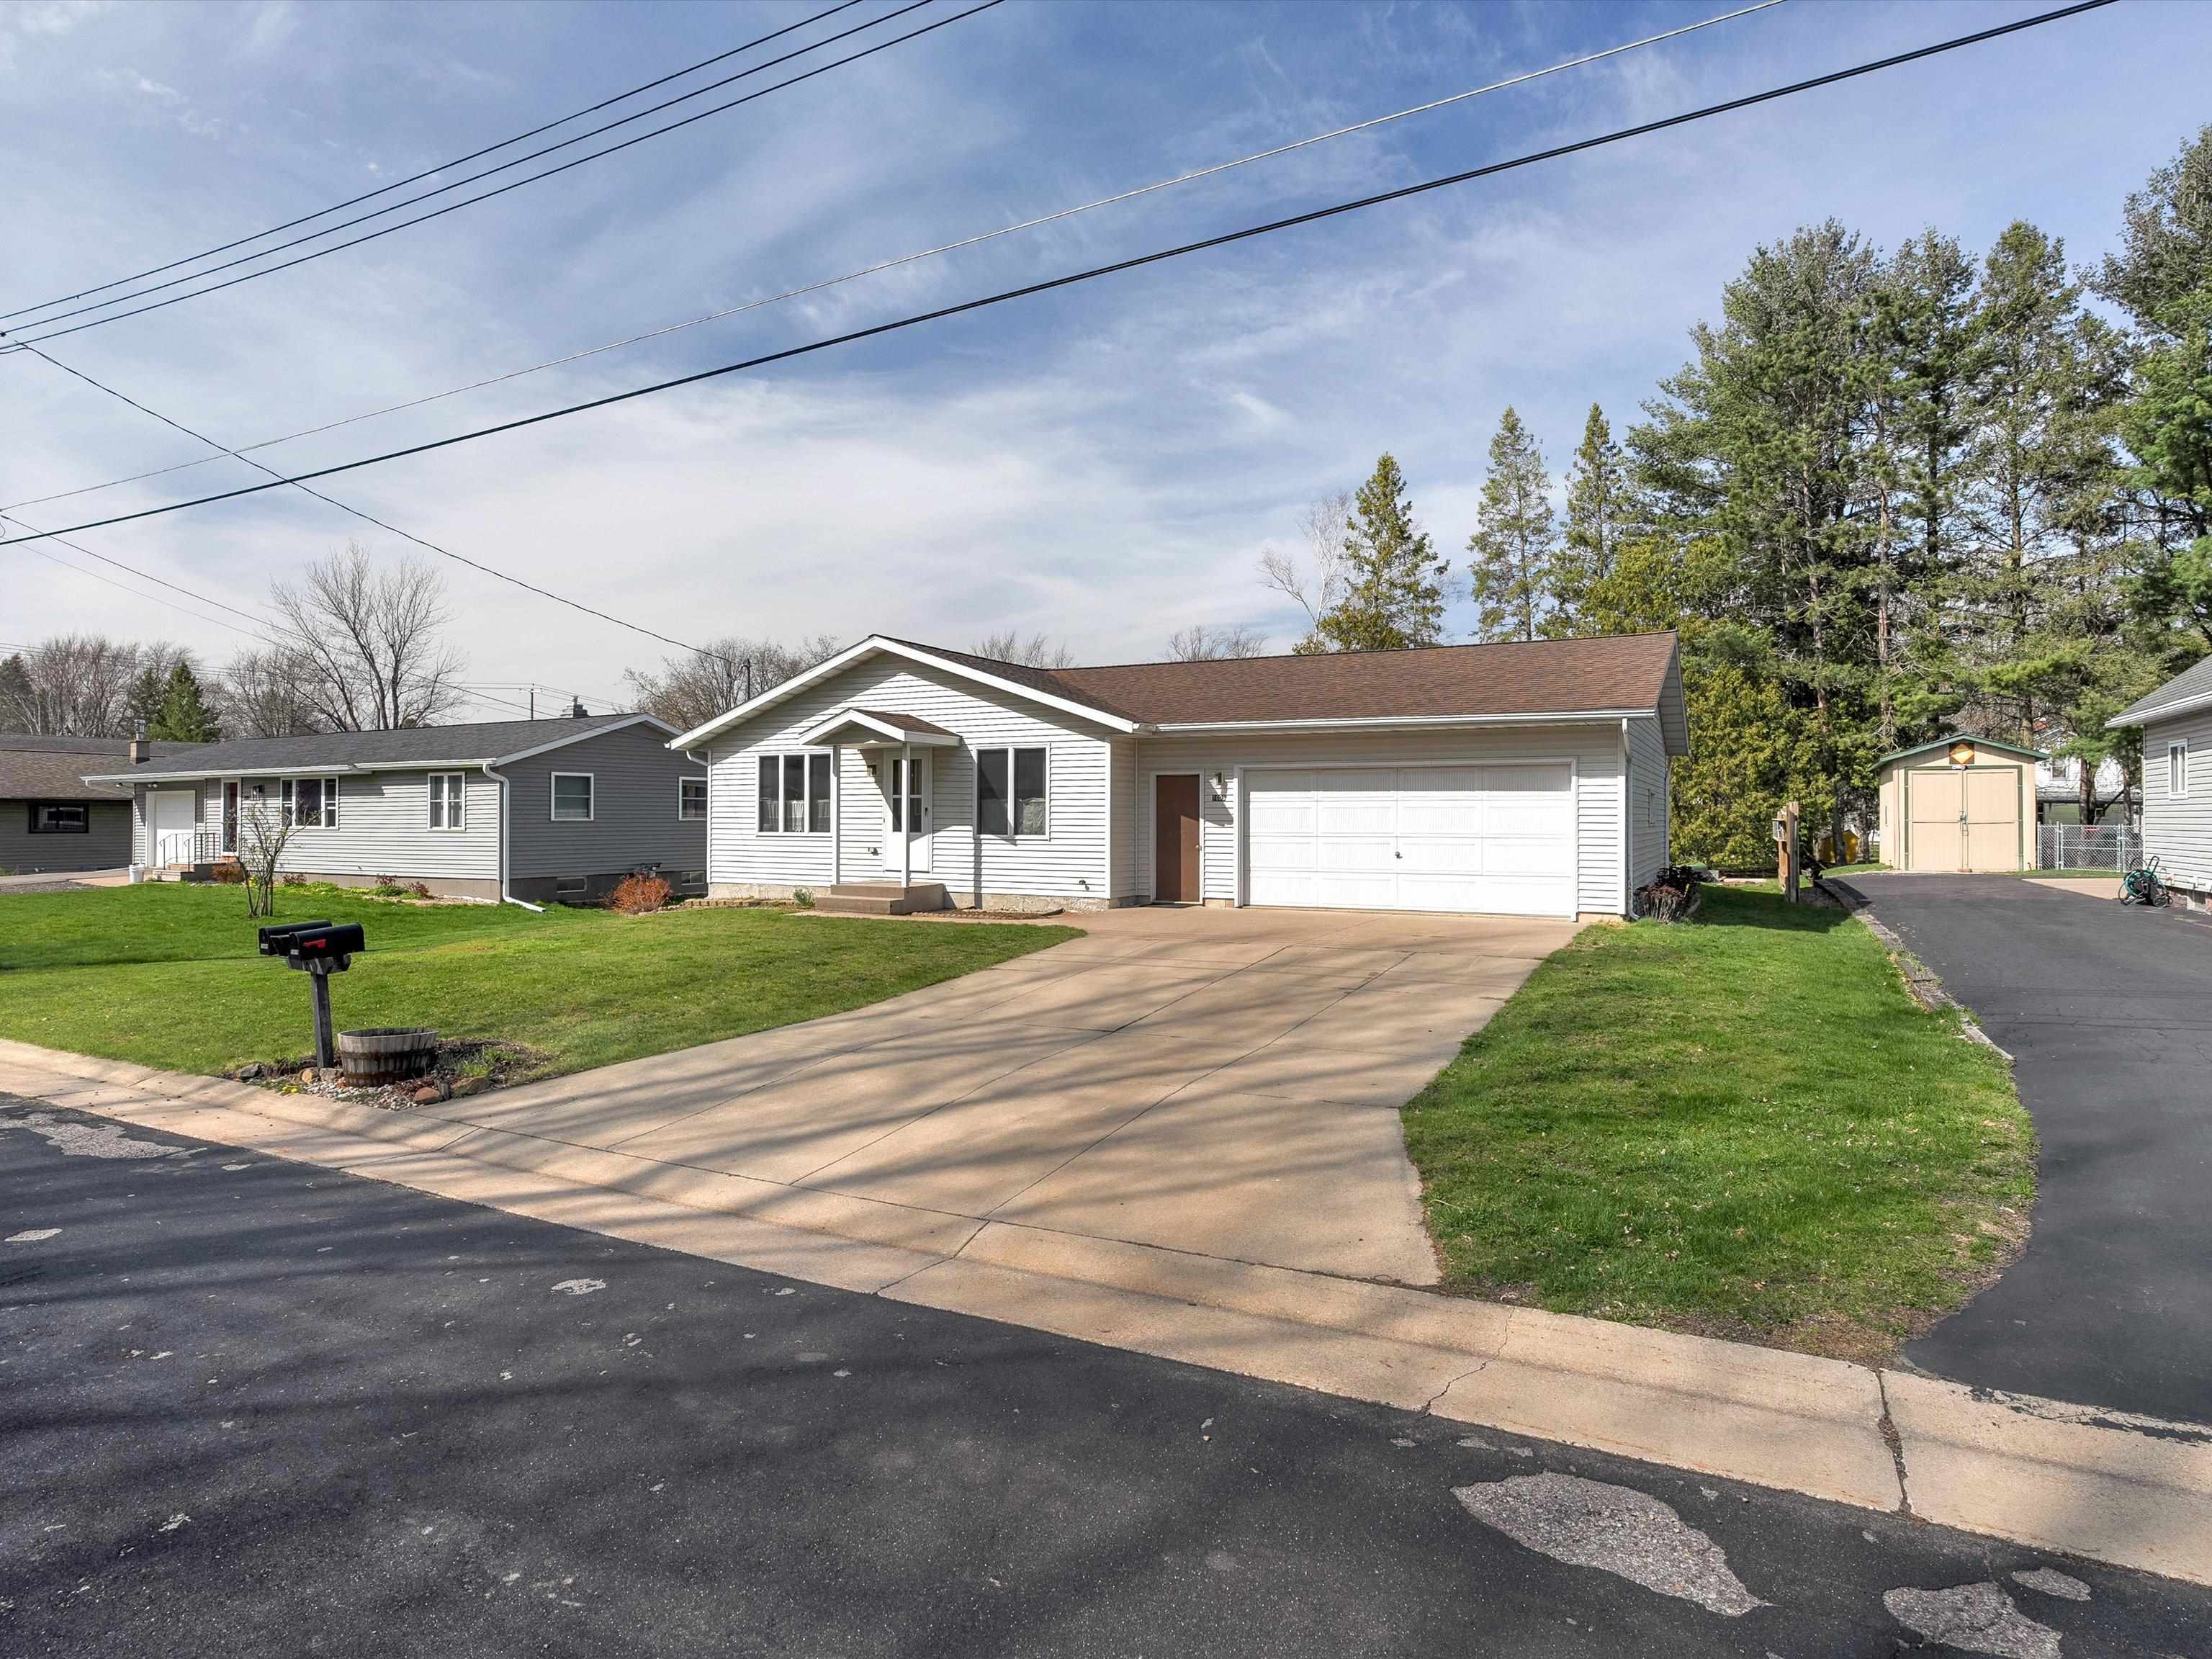 1009 E CLEVELAND STREET, Marshfield, Wisconsin 54449, 3 Bedrooms Bedrooms, ,2 BathroomsBathrooms,Residential,For Sale,1009 E CLEVELAND STREET,22401543